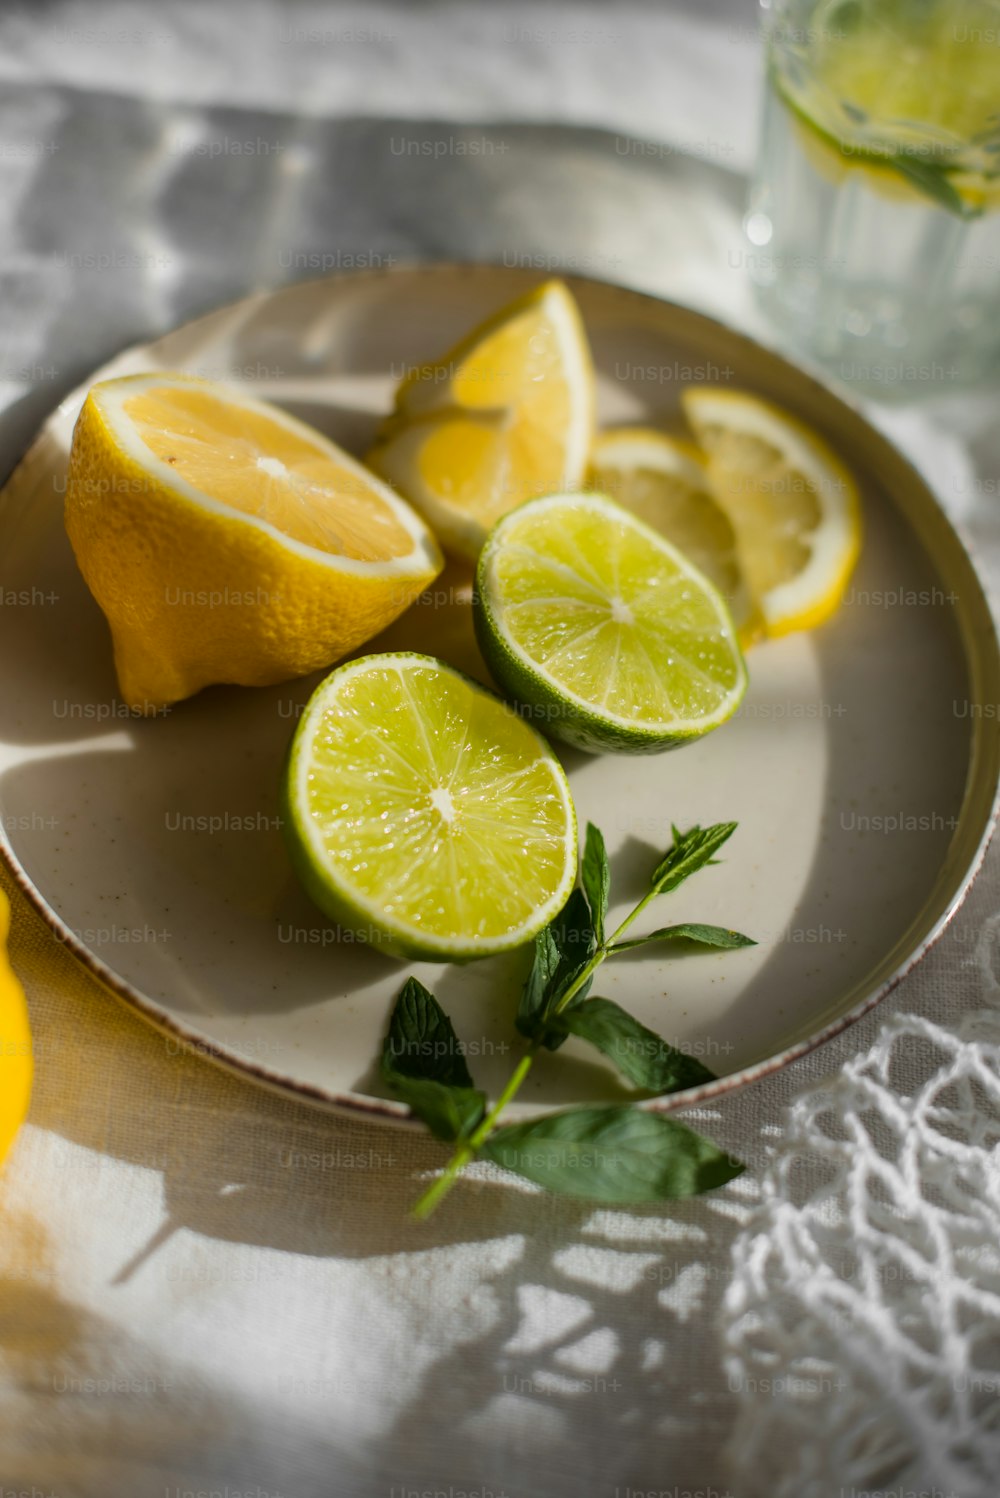 a plate of lemons and limes on a table